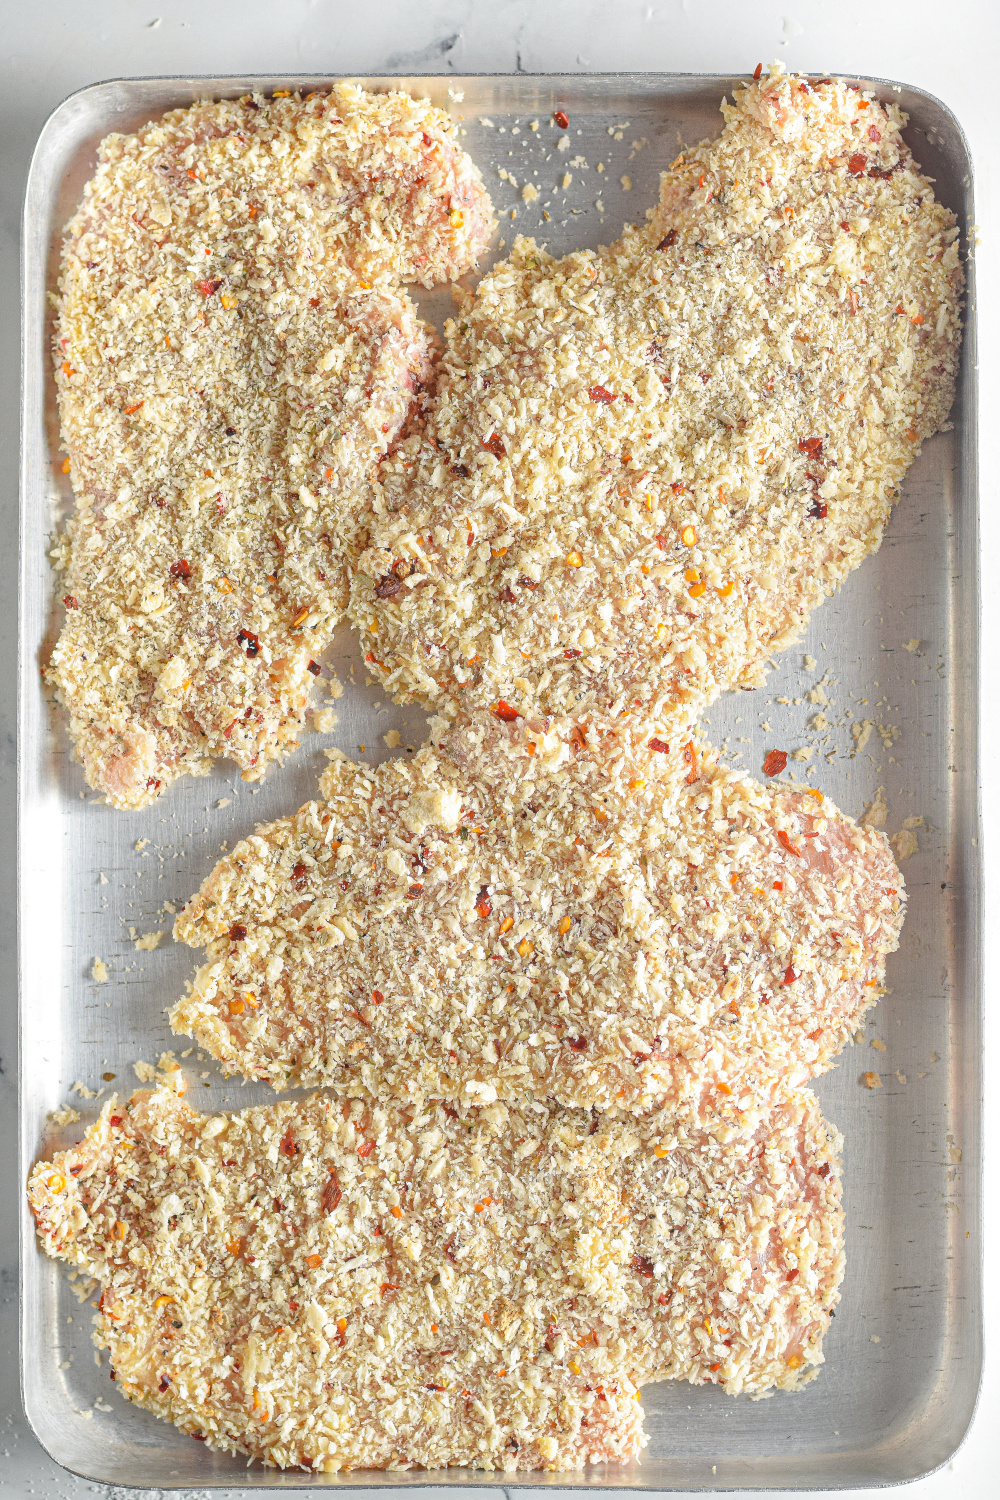 chicken coated with bread crumbs